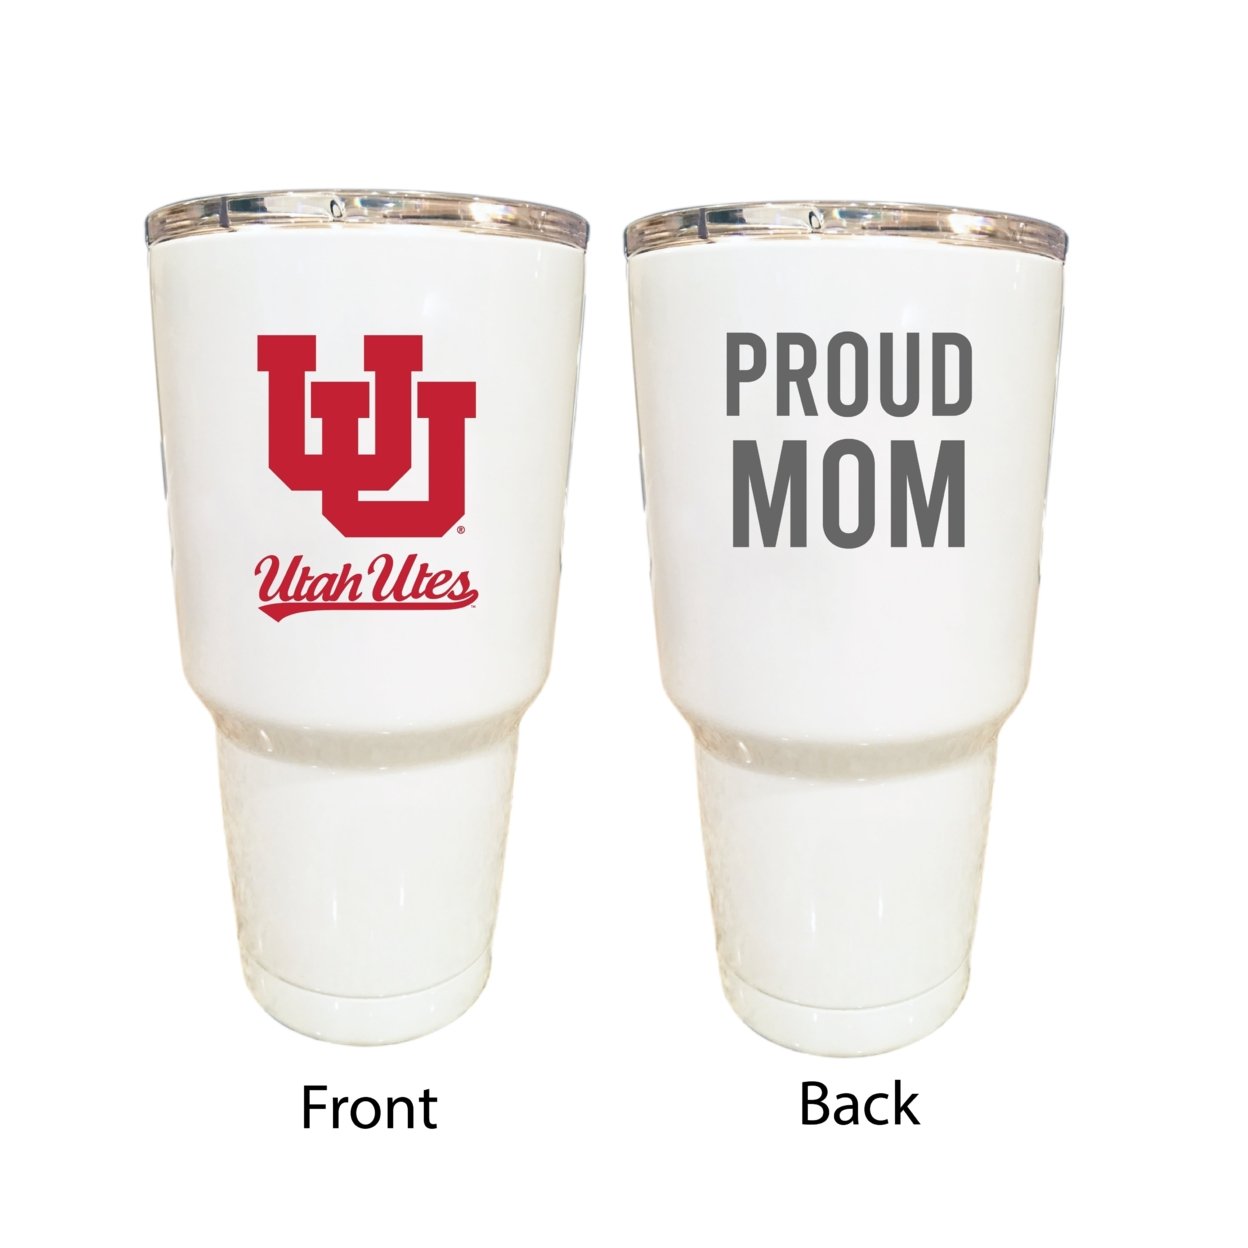 Utah Utes Proud Mom 24 Oz Insulated Stainless Steel Tumblers Choose Your Color.